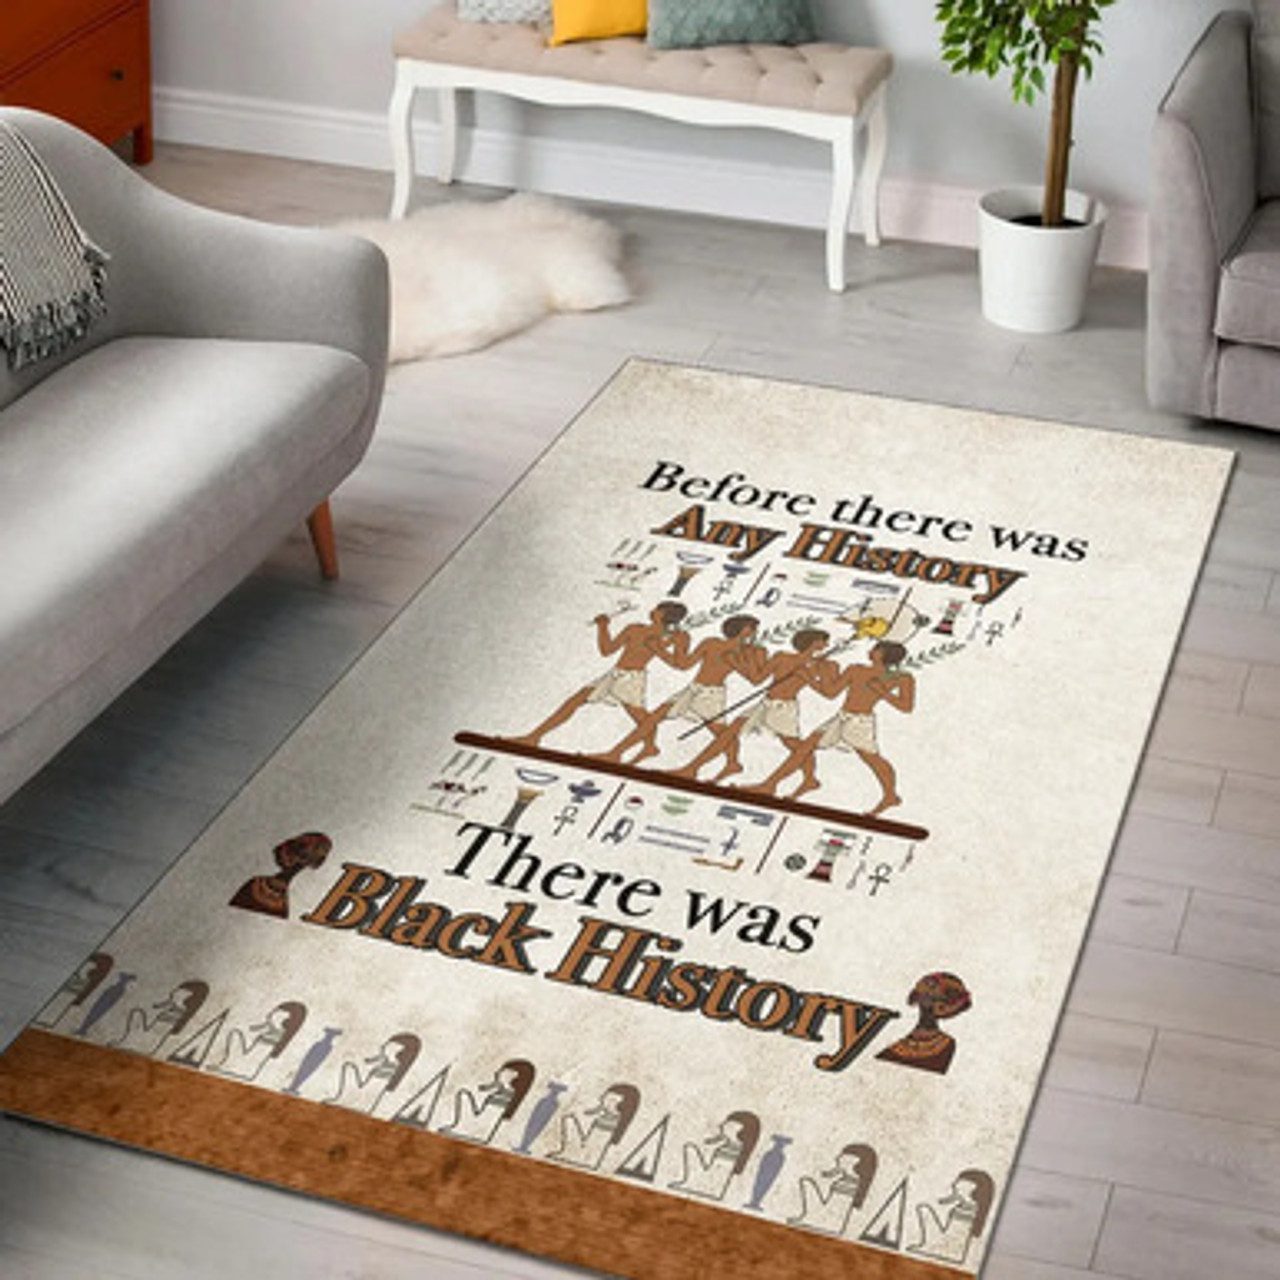 African Area Rug – African Patterns There Was Black History Area Rug